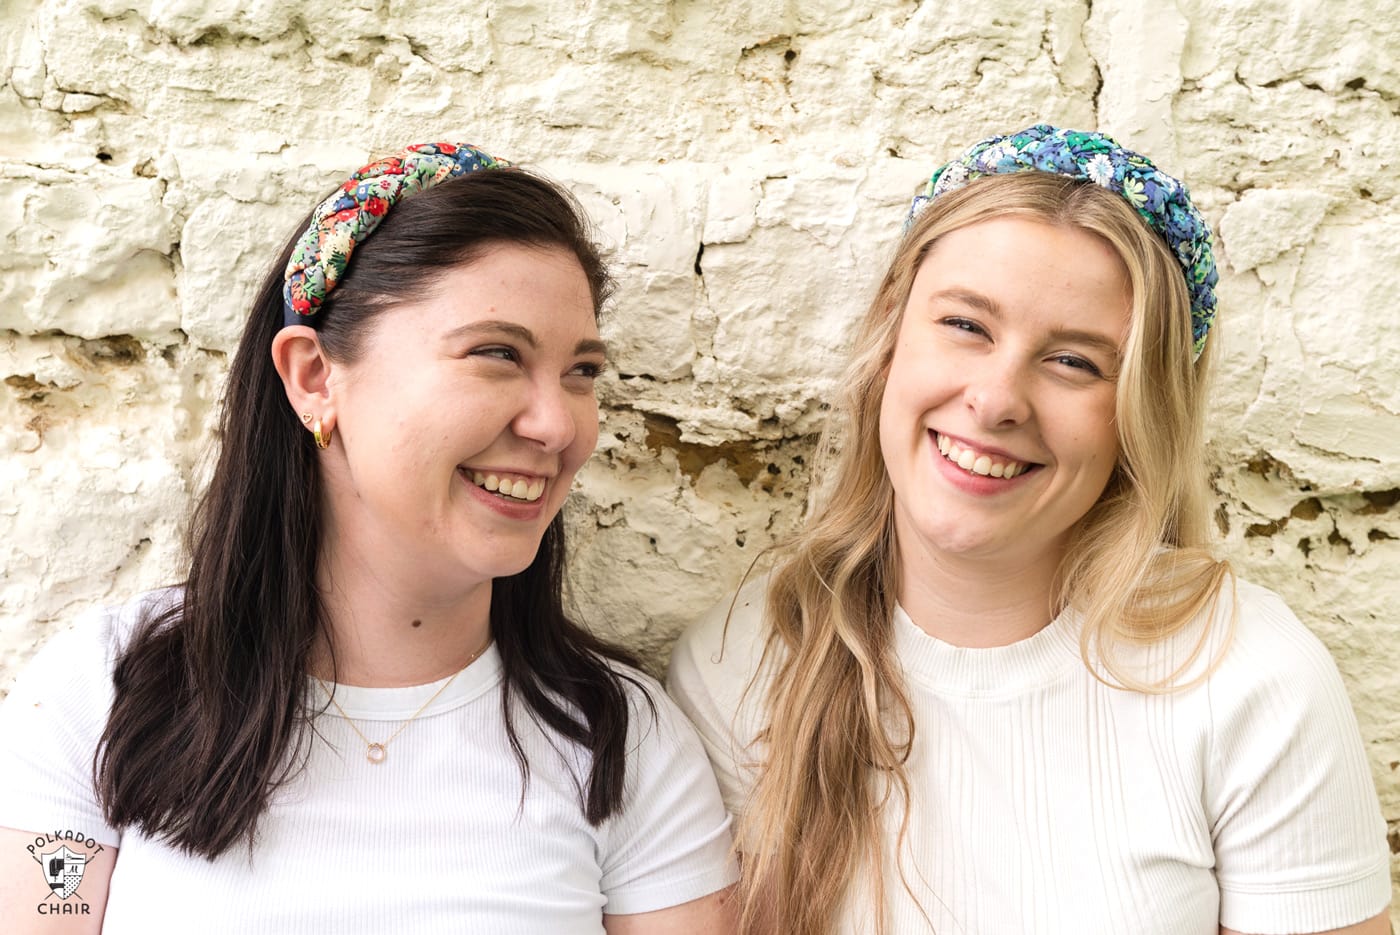 two girls wearing white shirts and colorful braided headbands